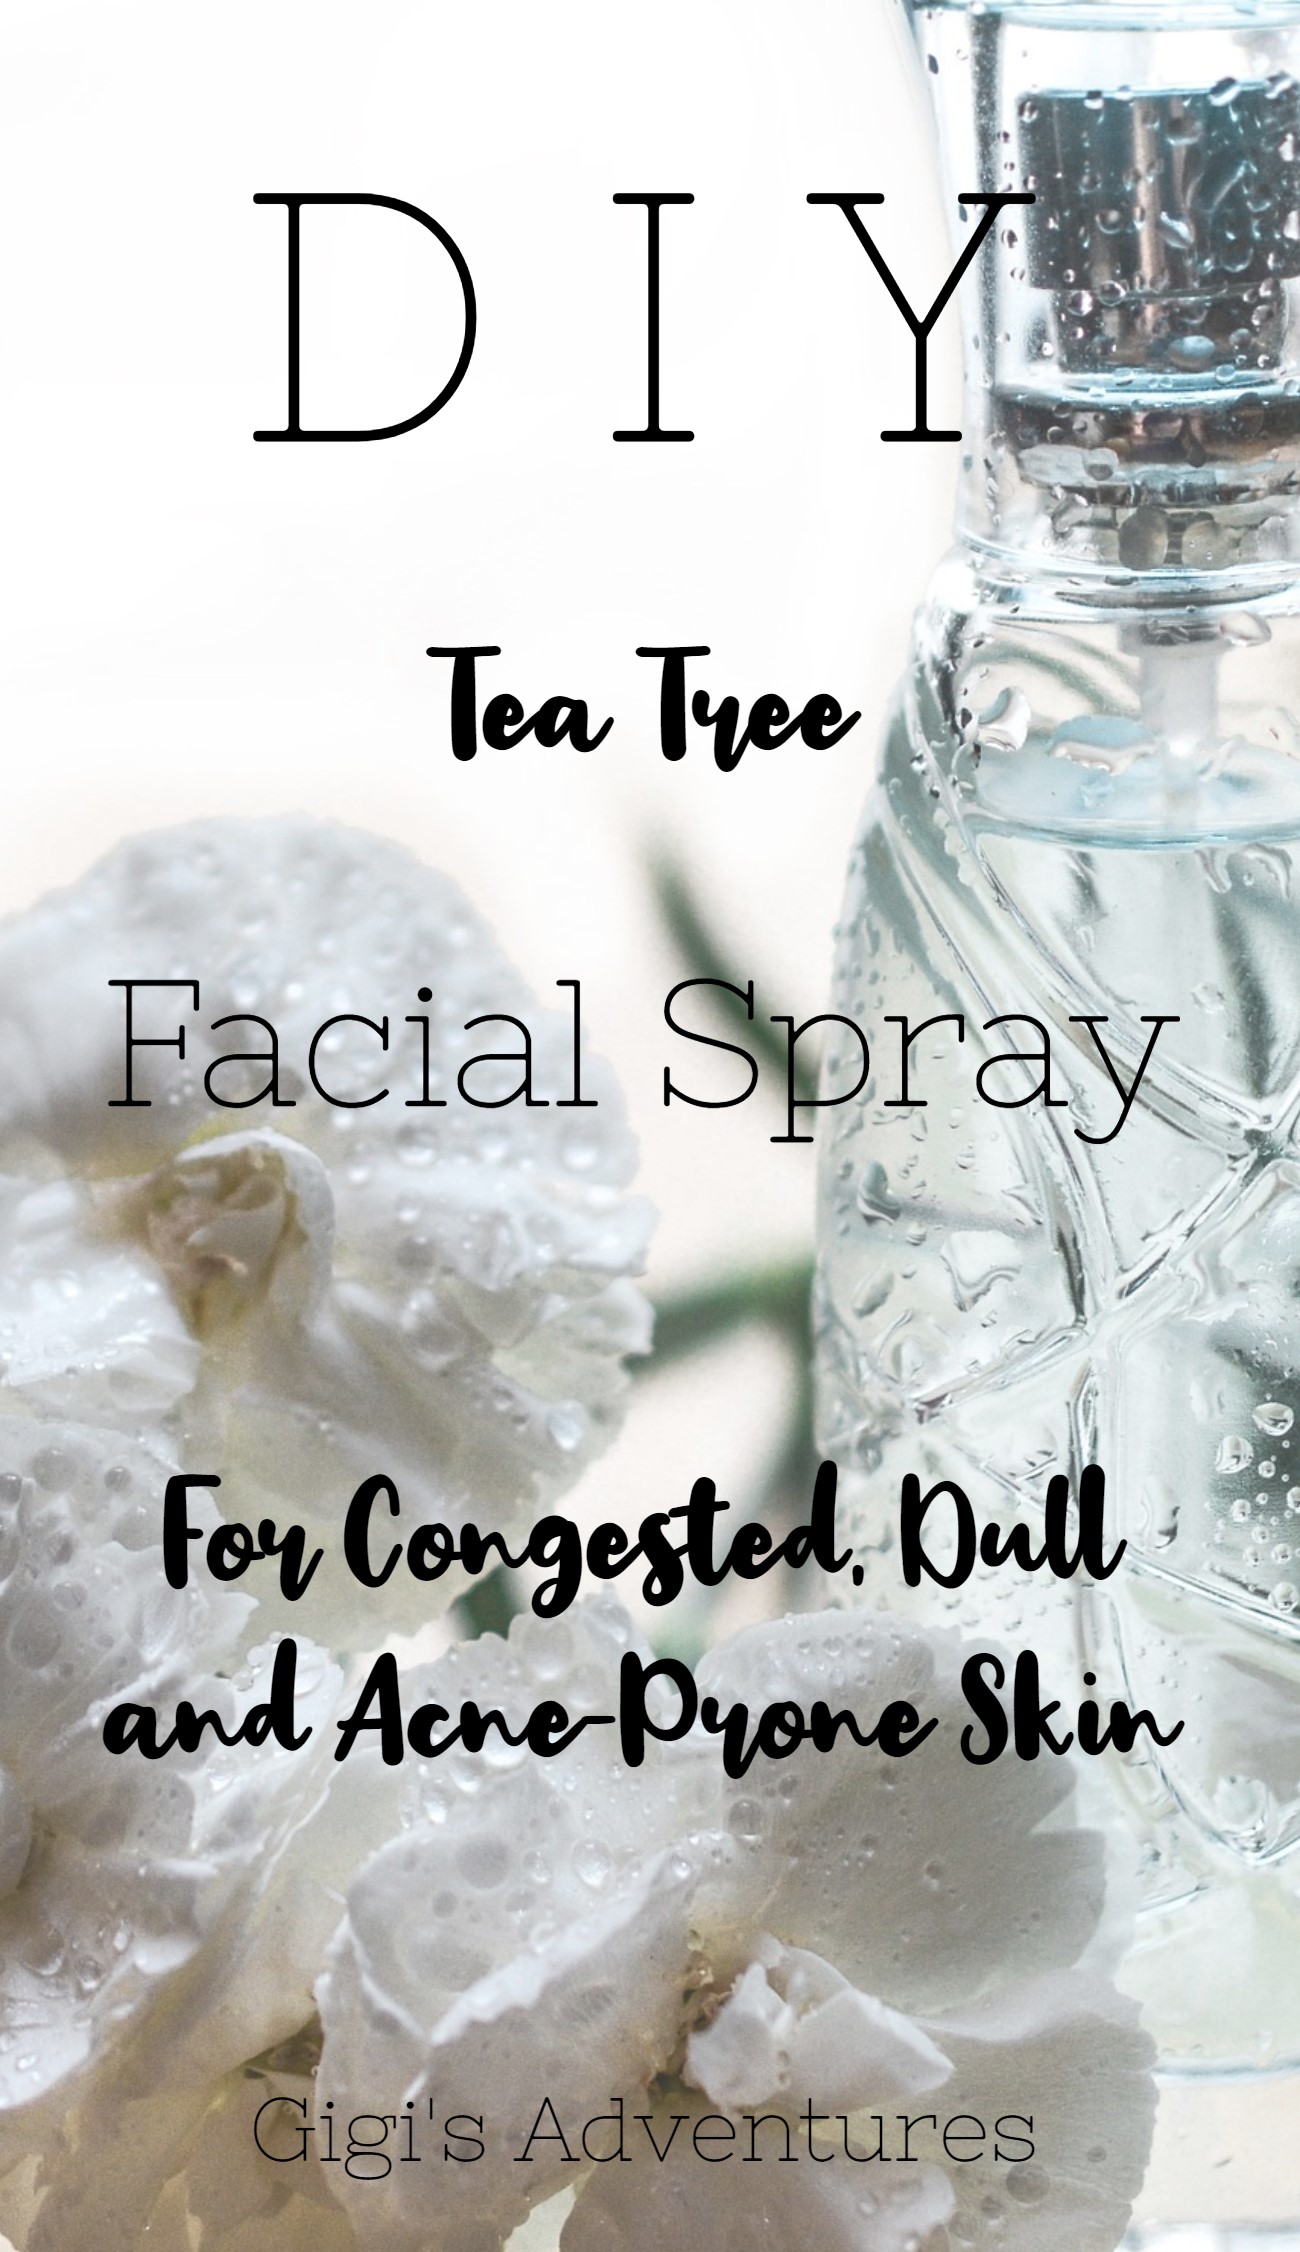 DIY Tea Tree Facial Spray - For Congested, Dull and Acne-Prone Skin